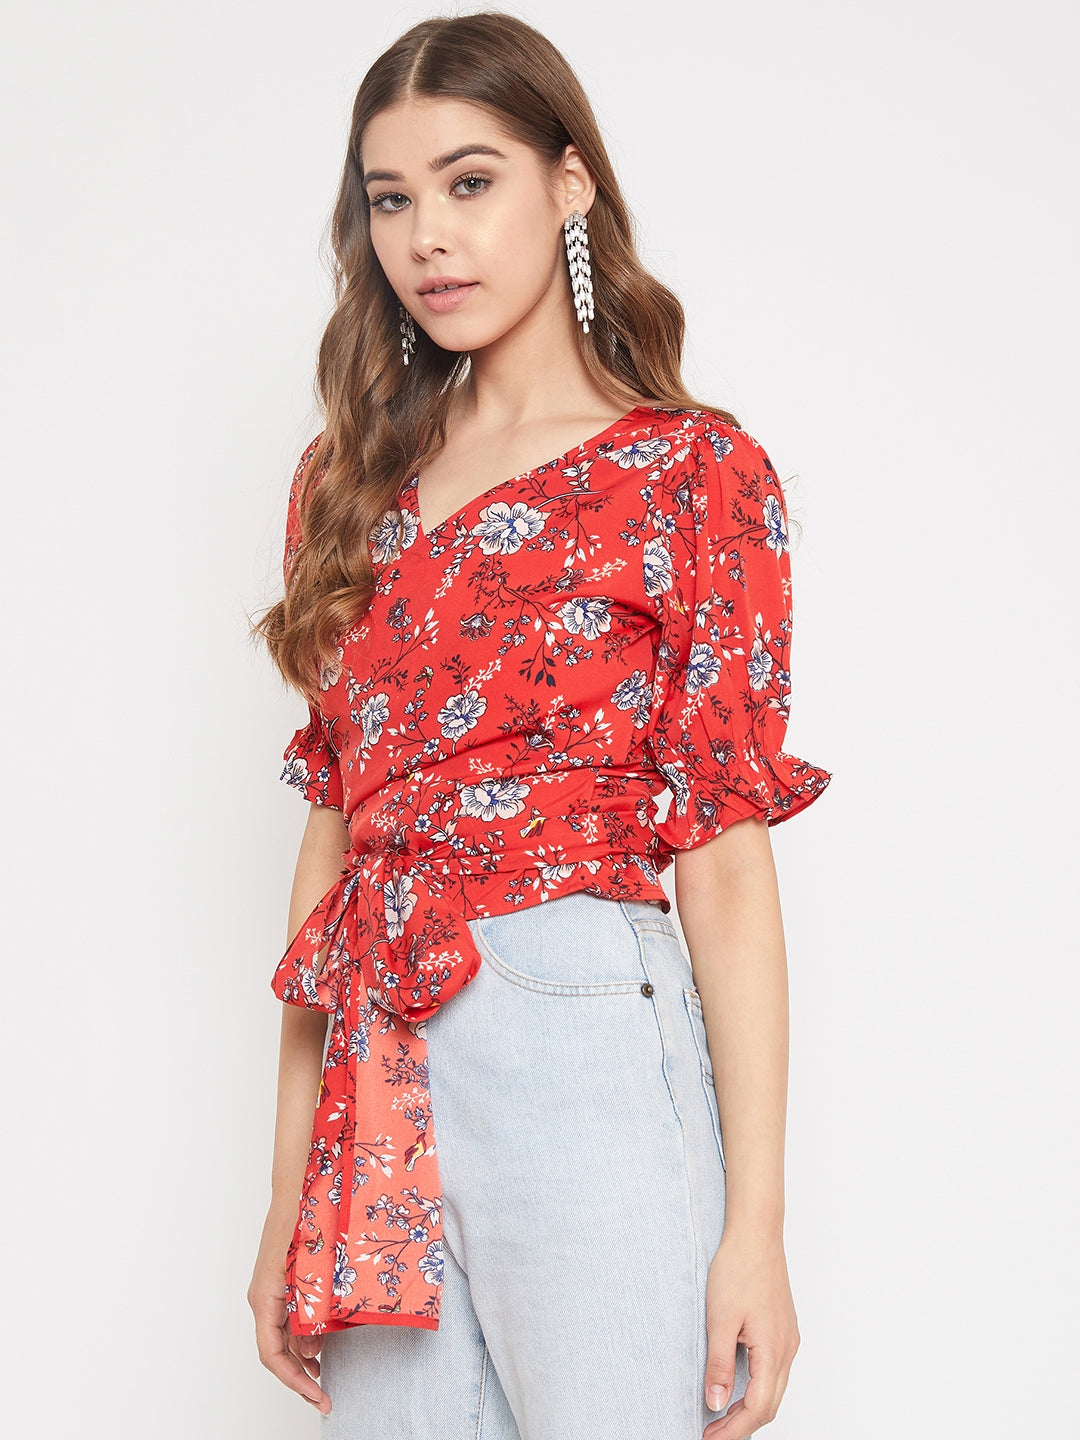 Berrylush Women Red & White Floral Printed V-Neck Tie-Up Knot Wrap Top